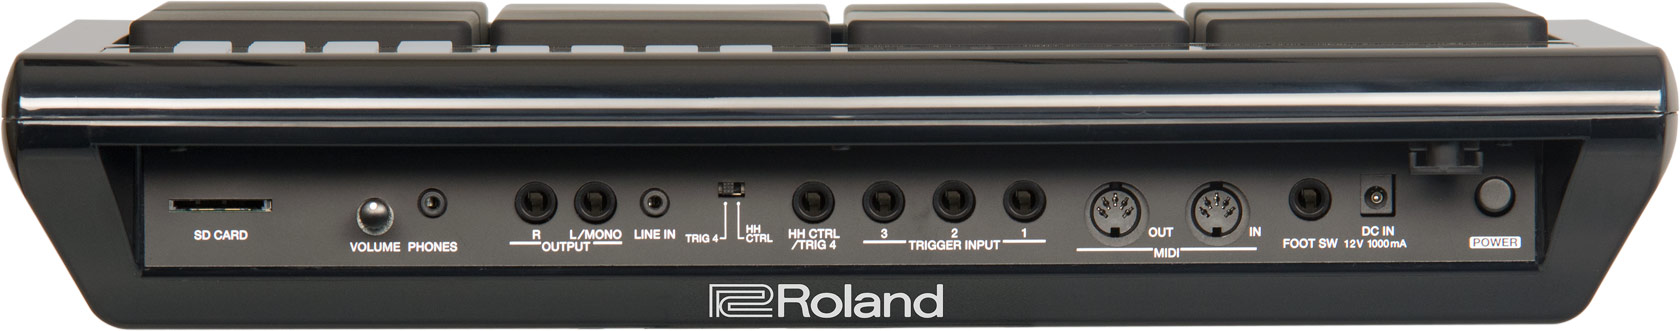 roland spd 20 charger